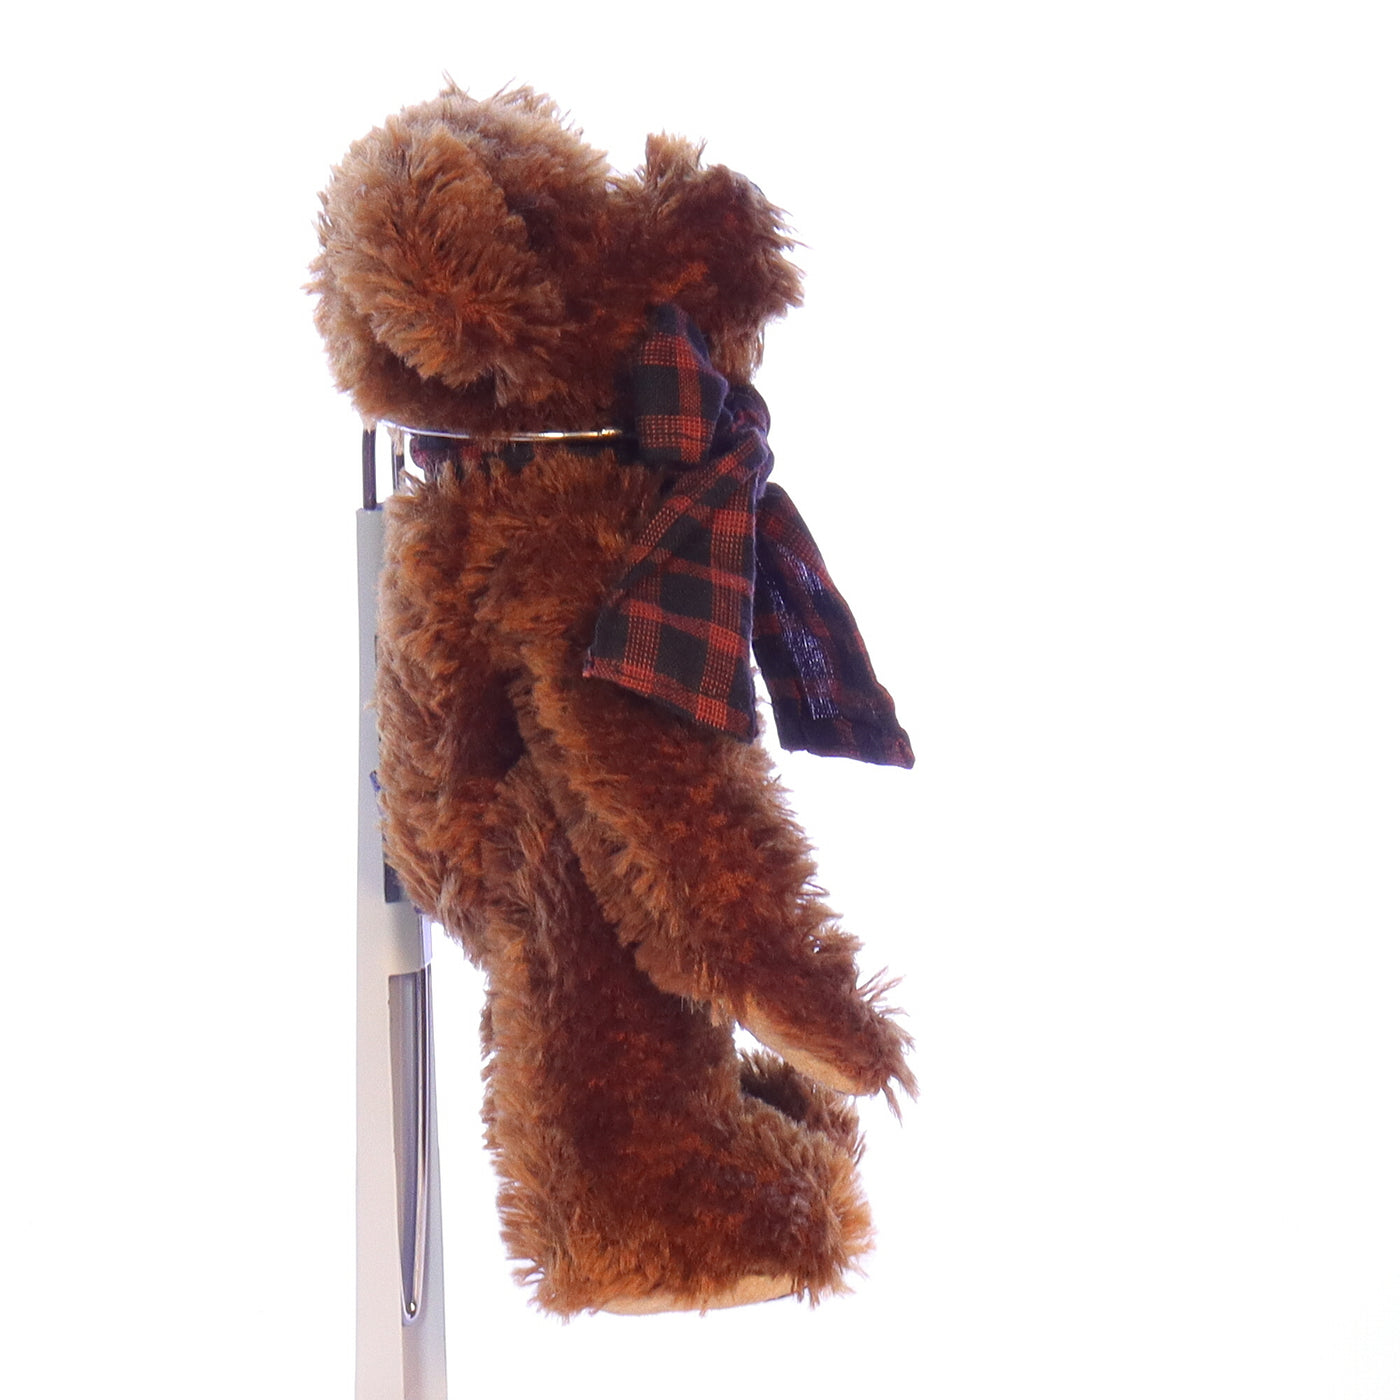 Boyds_Bears_and_Friends_590070-05_Reagan_V_Bearington_The_Original_Mohair_Bear_Collection_Stuffed_Animal_1997 Right View